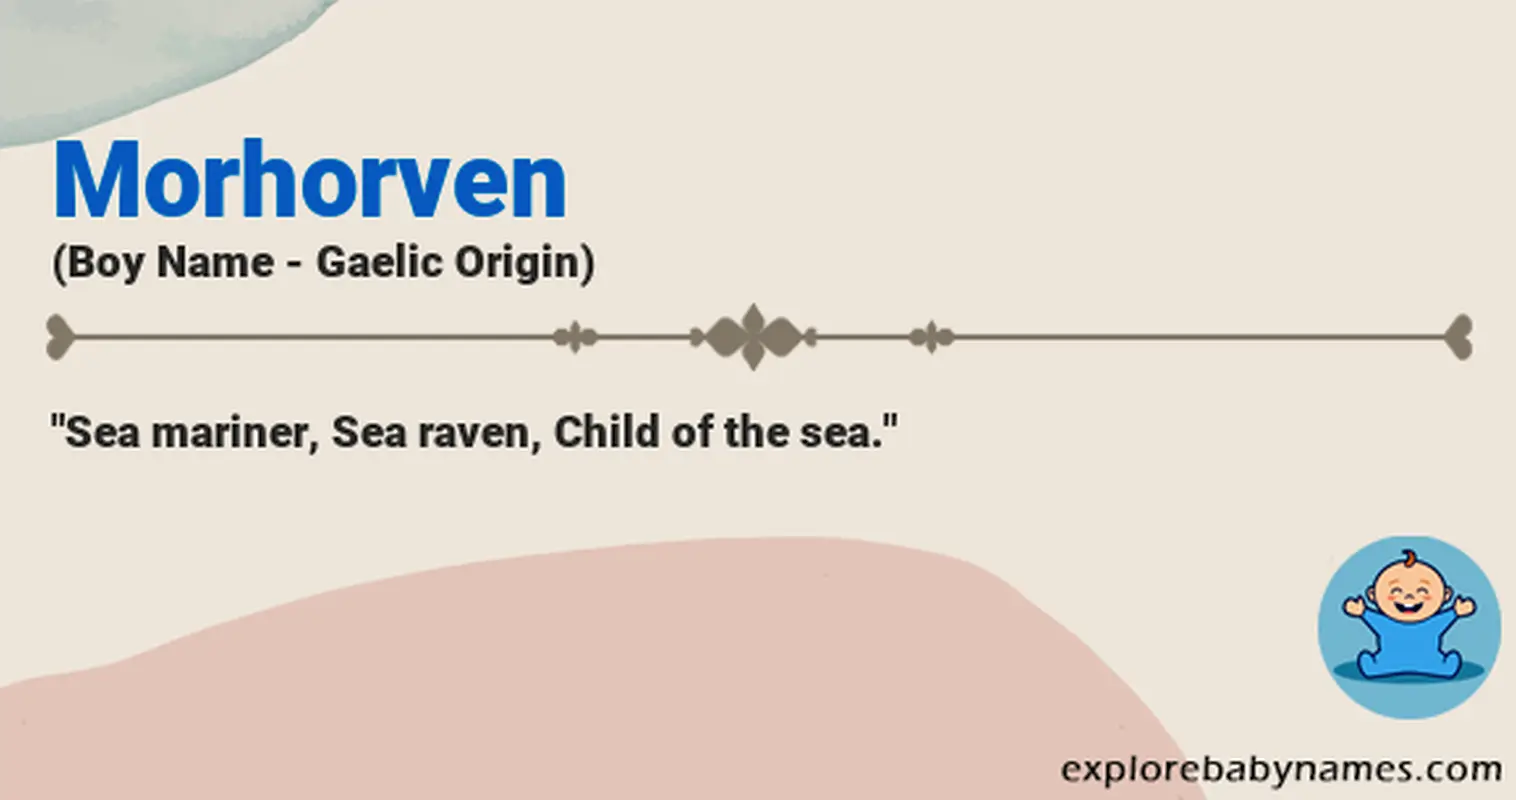 Meaning of Morhorven